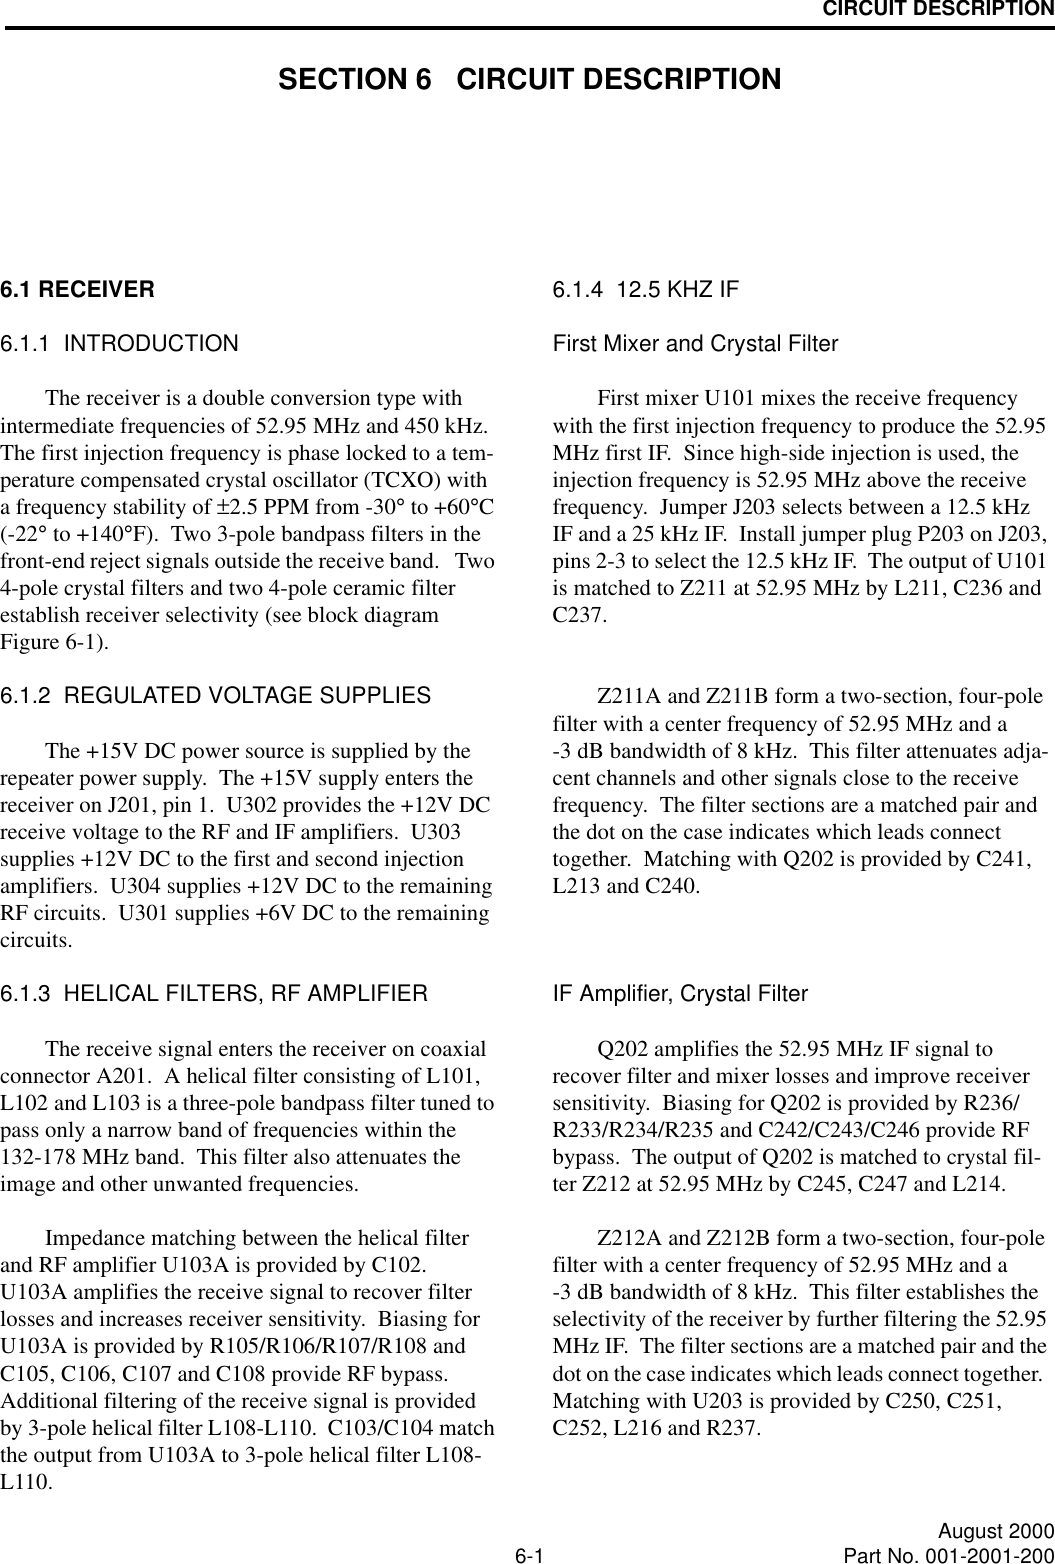 6-1 August 2000Part No. 001-2001-200CIRCUIT DESCRIPTIONSECTION 6   CIRCUIT DESCRIPTION6.1 RECEIVER6.1.1  INTRODUCTIONThe receiver is a double conversion type with intermediate frequencies of 52.95 MHz and 450 kHz.  The first injection frequency is phase locked to a tem-perature compensated crystal oscillator (TCXO) with a frequency stability of ±2.5 PPM from -30° to +60°C (-22° to +140°F).  Two 3-pole bandpass filters in the front-end reject signals outside the receive band.   Two 4-pole crystal filters and two 4-pole ceramic filter establish receiver selectivity (see block diagram Figure 6-1).6.1.2  REGULATED VOLTAGE SUPPLIESThe +15V DC power source is supplied by the repeater power supply.  The +15V supply enters the receiver on J201, pin 1.  U302 provides the +12V DC receive voltage to the RF and IF amplifiers.  U303 supplies +12V DC to the first and second injection amplifiers.  U304 supplies +12V DC to the remaining RF circuits.  U301 supplies +6V DC to the remaining circuits.6.1.3  HELICAL FILTERS, RF AMPLIFIERThe receive signal enters the receiver on coaxial connector A201.  A helical filter consisting of L101, L102 and L103 is a three-pole bandpass filter tuned to pass only a narrow band of frequencies within the 132-178 MHz band.  This filter also attenuates the image and other unwanted frequencies.Impedance matching between the helical filter and RF amplifier U103A is provided by C102.  U103A amplifies the receive signal to recover filter losses and increases receiver sensitivity.  Biasing for U103A is provided by R105/R106/R107/R108 and C105, C106, C107 and C108 provide RF bypass.  Additional filtering of the receive signal is provided by 3-pole helical filter L108-L110.  C103/C104 match the output from U103A to 3-pole helical filter L108-L110.6.1.4  12.5 KHZ IFFirst Mixer and Crystal FilterFirst mixer U101 mixes the receive frequency with the first injection frequency to produce the 52.95 MHz first IF.  Since high-side injection is used, the injection frequency is 52.95 MHz above the receive frequency.  Jumper J203 selects between a 12.5 kHz IF and a 25 kHz IF.  Install jumper plug P203 on J203, pins 2-3 to select the 12.5 kHz IF.  The output of U101 is matched to Z211 at 52.95 MHz by L211, C236 and C237.Z211A and Z211B form a two-section, four-pole filter with a center frequency of 52.95 MHz and a -3 dB bandwidth of 8 kHz.  This filter attenuates adja-cent channels and other signals close to the receive frequency.  The filter sections are a matched pair and the dot on the case indicates which leads connect together.  Matching with Q202 is provided by C241, L213 and C240.IF Amplifier, Crystal FilterQ202 amplifies the 52.95 MHz IF signal to recover filter and mixer losses and improve receiver sensitivity.  Biasing for Q202 is provided by R236/ R233/R234/R235 and C242/C243/C246 provide RF bypass.  The output of Q202 is matched to crystal fil-ter Z212 at 52.95 MHz by C245, C247 and L214.Z212A and Z212B form a two-section, four-pole filter with a center frequency of 52.95 MHz and a -3 dB bandwidth of 8 kHz.  This filter establishes the selectivity of the receiver by further filtering the 52.95 MHz IF.  The filter sections are a matched pair and the dot on the case indicates which leads connect together.  Matching with U203 is provided by C250, C251, C252, L216 and R237.